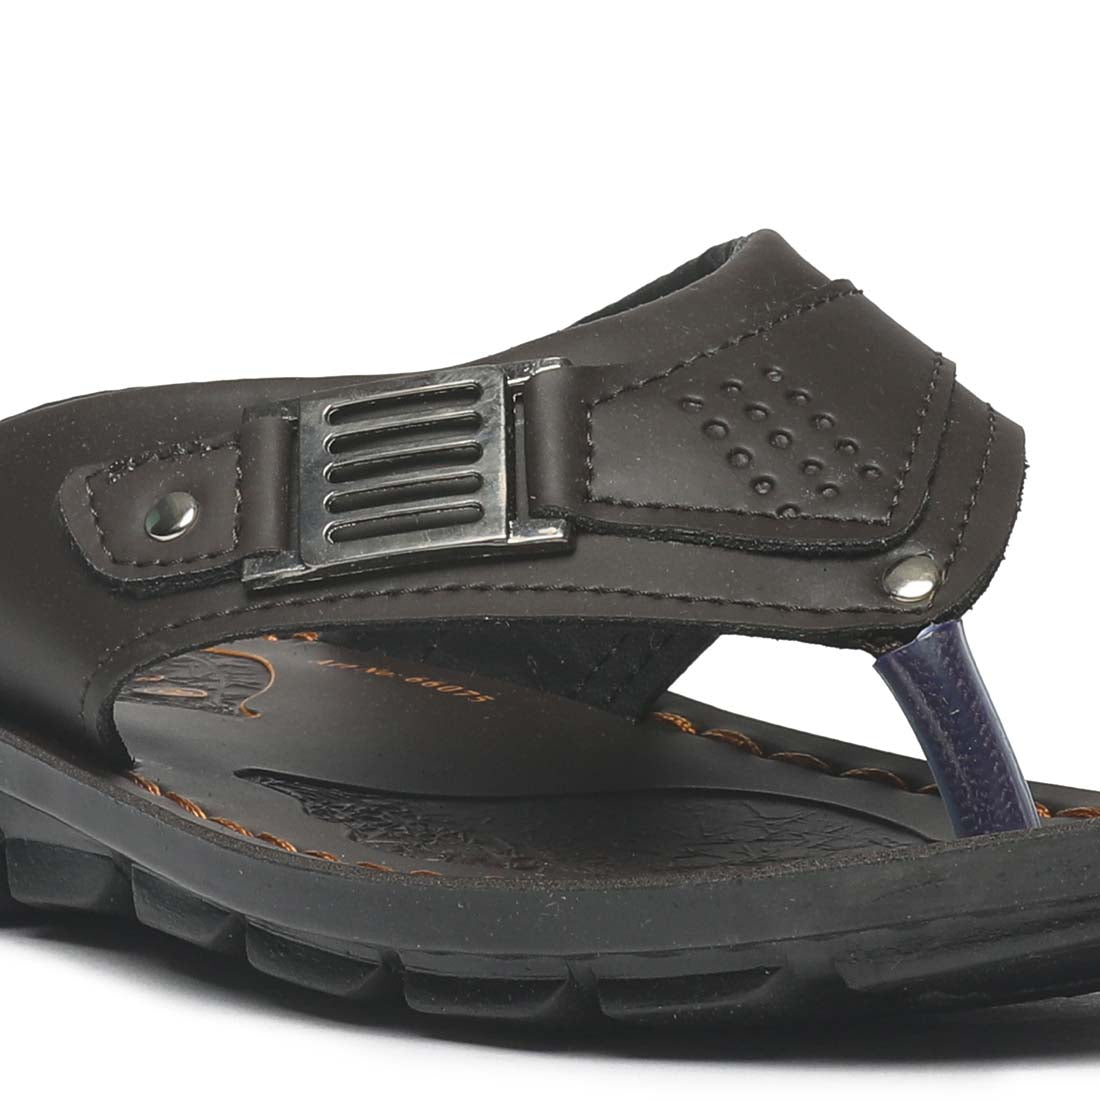 Paragon PU66075G Men Stylish Lightweight Flipflops | Comfortable with Anti skid soles | Casual &amp; Trendy Slippers | Indoor &amp; Outdoor